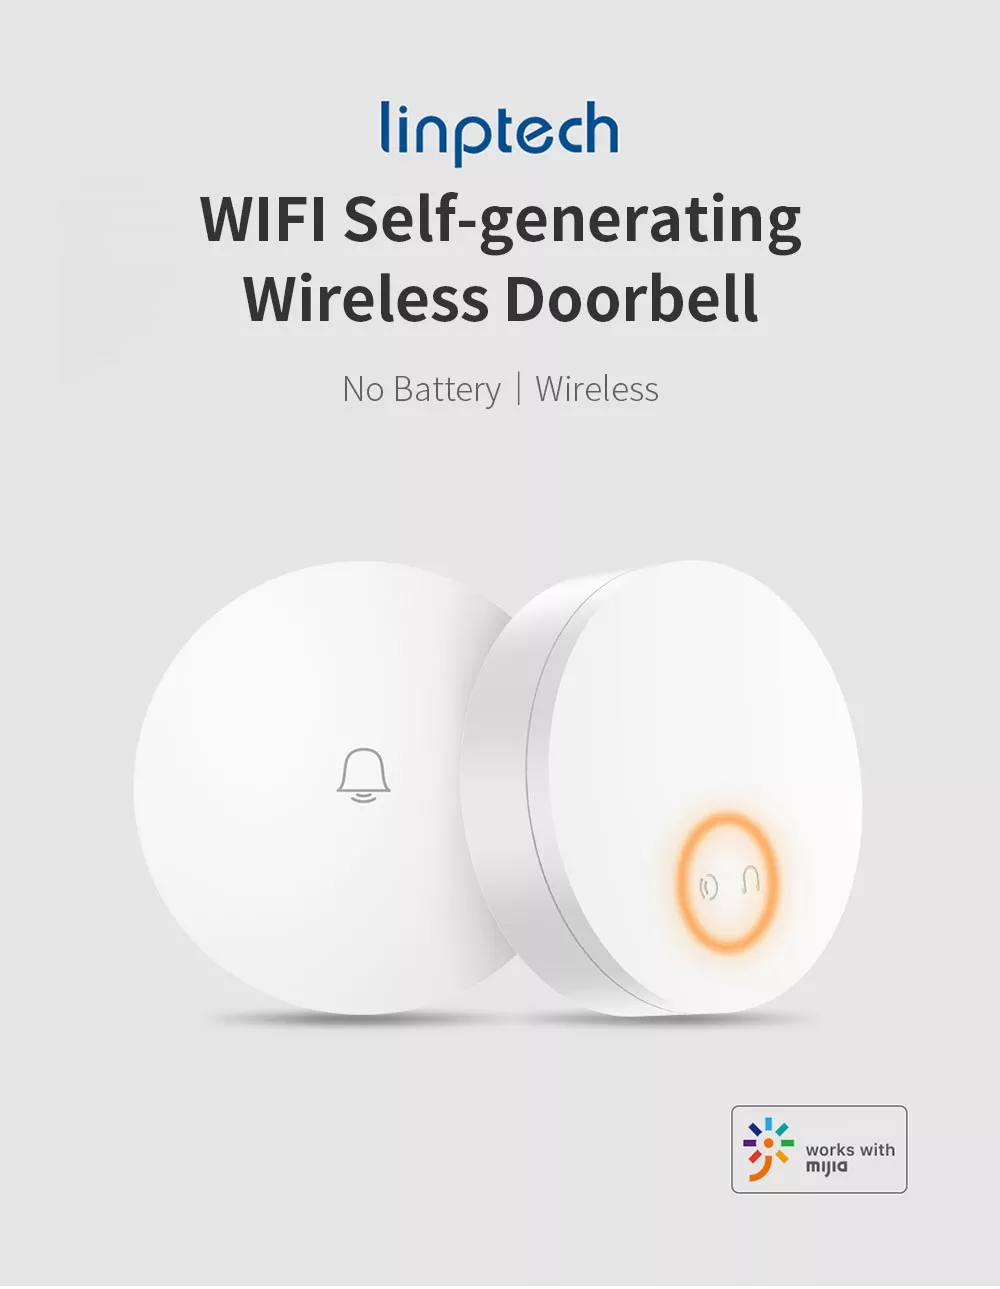 Original Linptech Self-power Wireless Doorbell WIFI Remote Setting From Eco-system 5